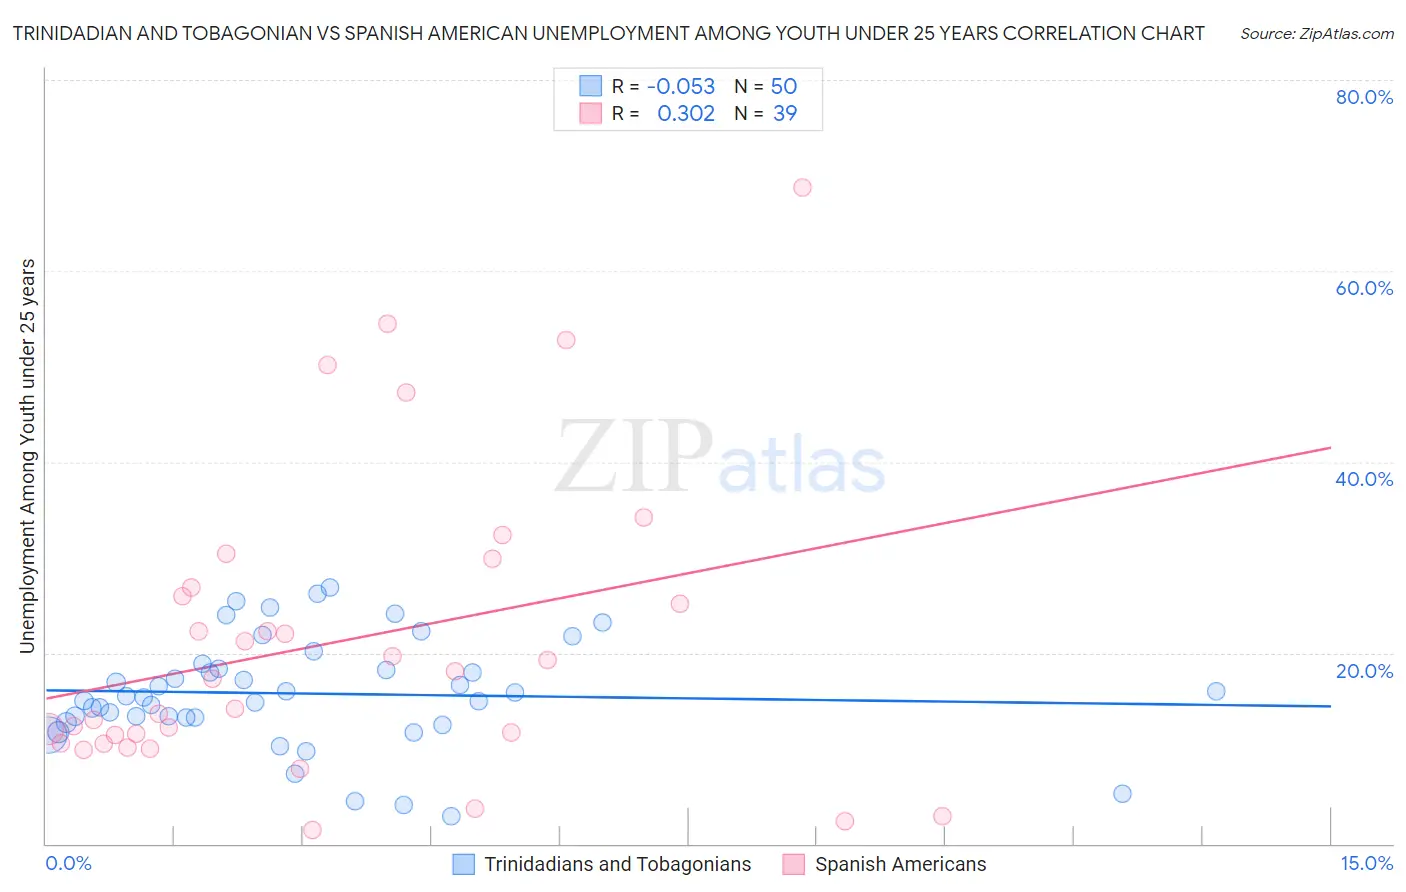 Trinidadian and Tobagonian vs Spanish American Unemployment Among Youth under 25 years